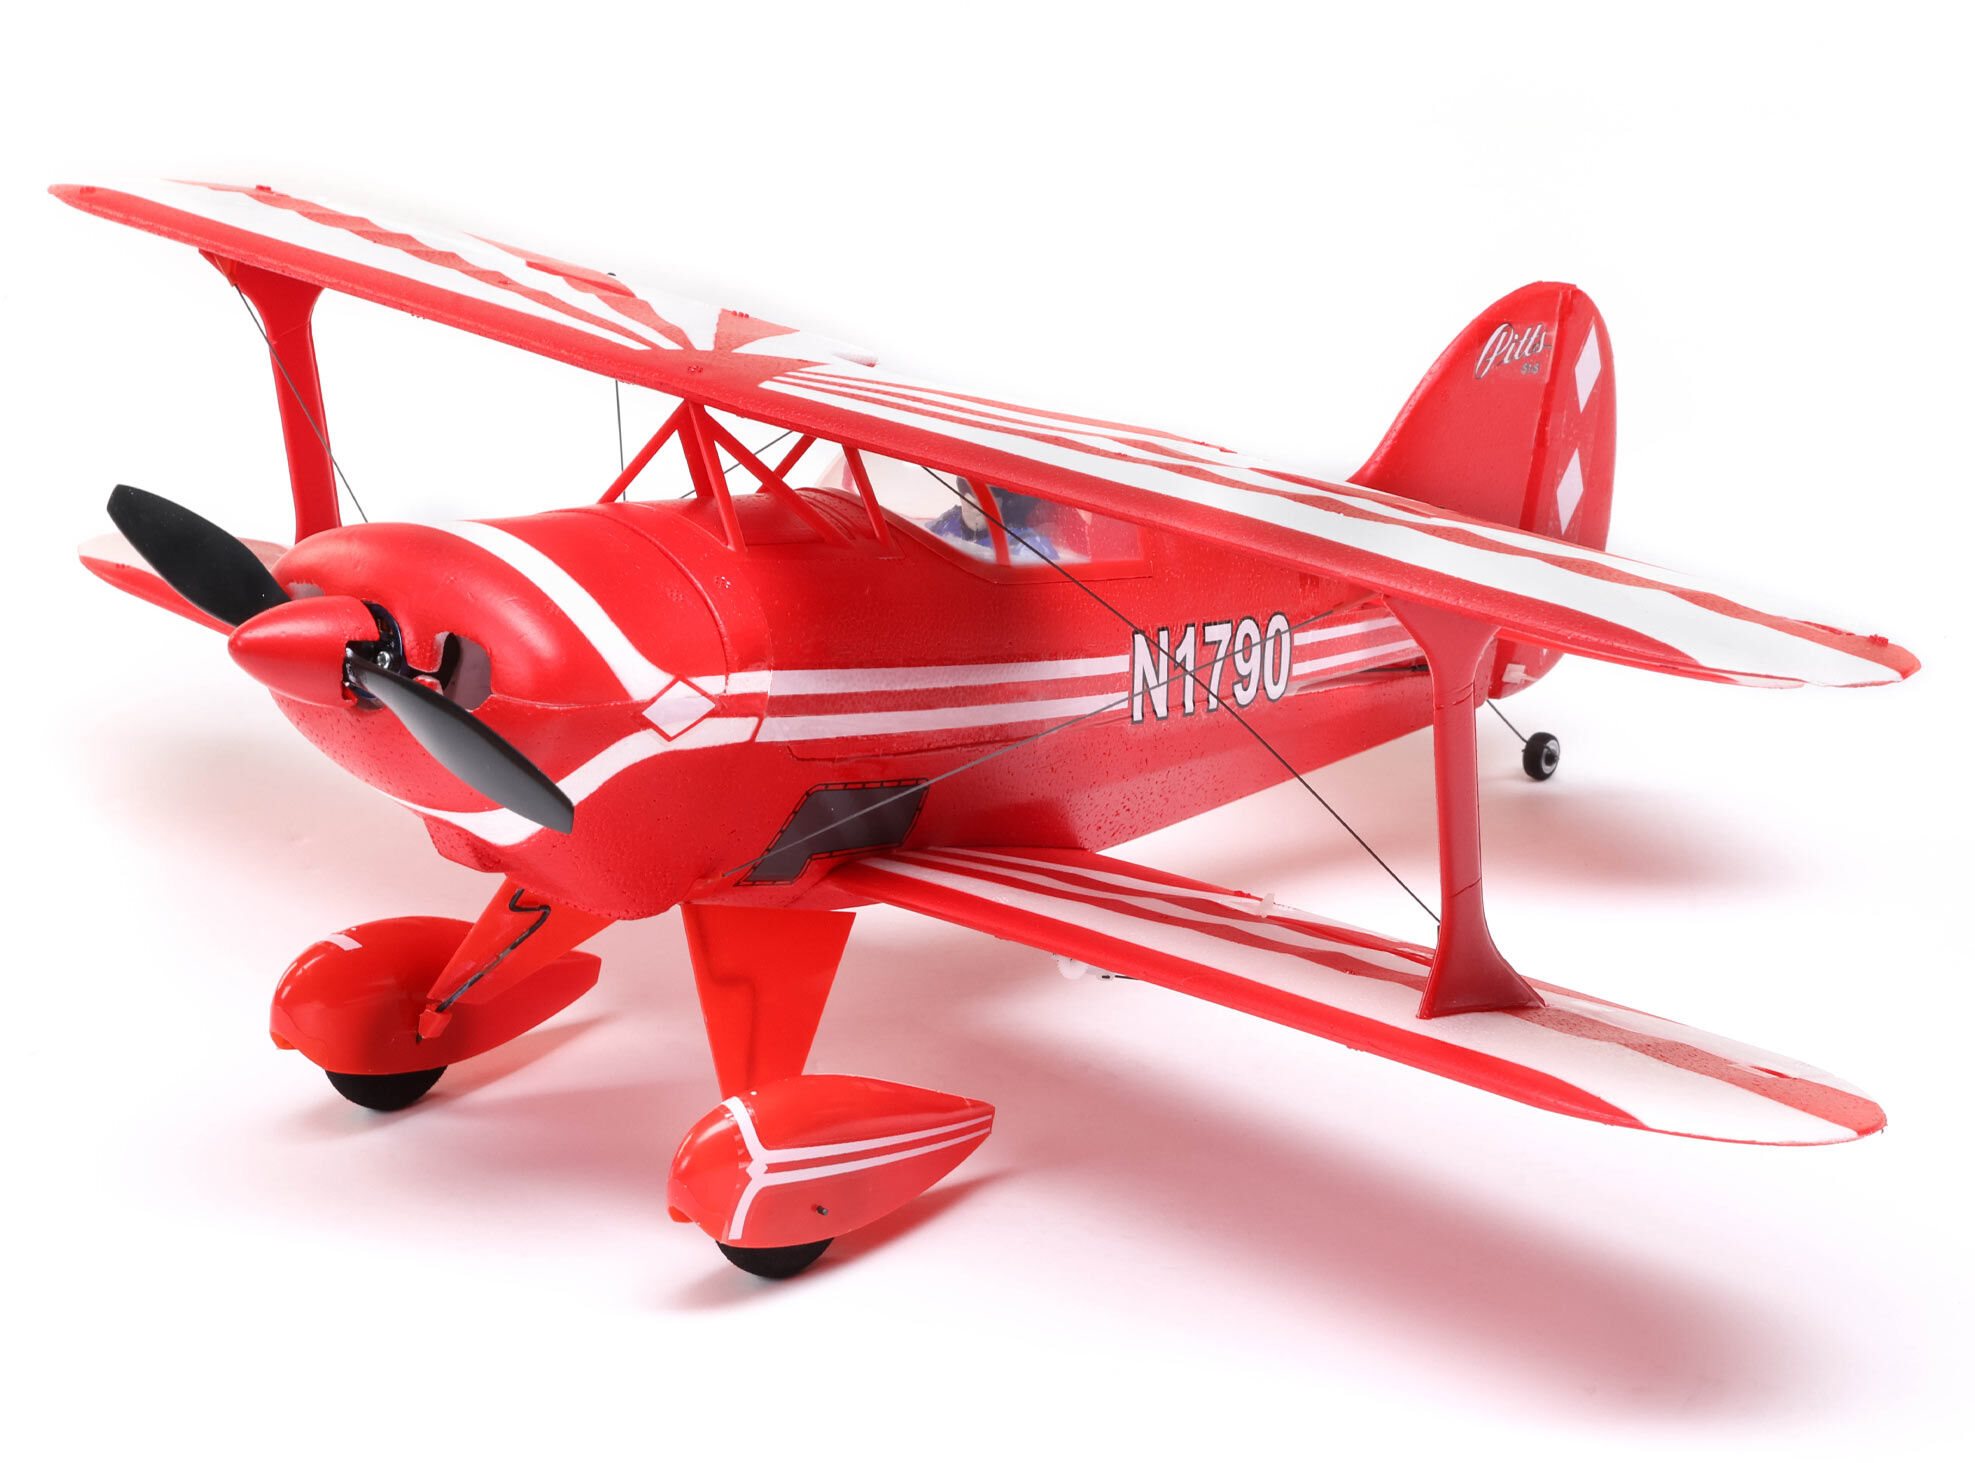 E-Flite UMX Pitts S-1S BNF Basic with AS3X and SAFE Select